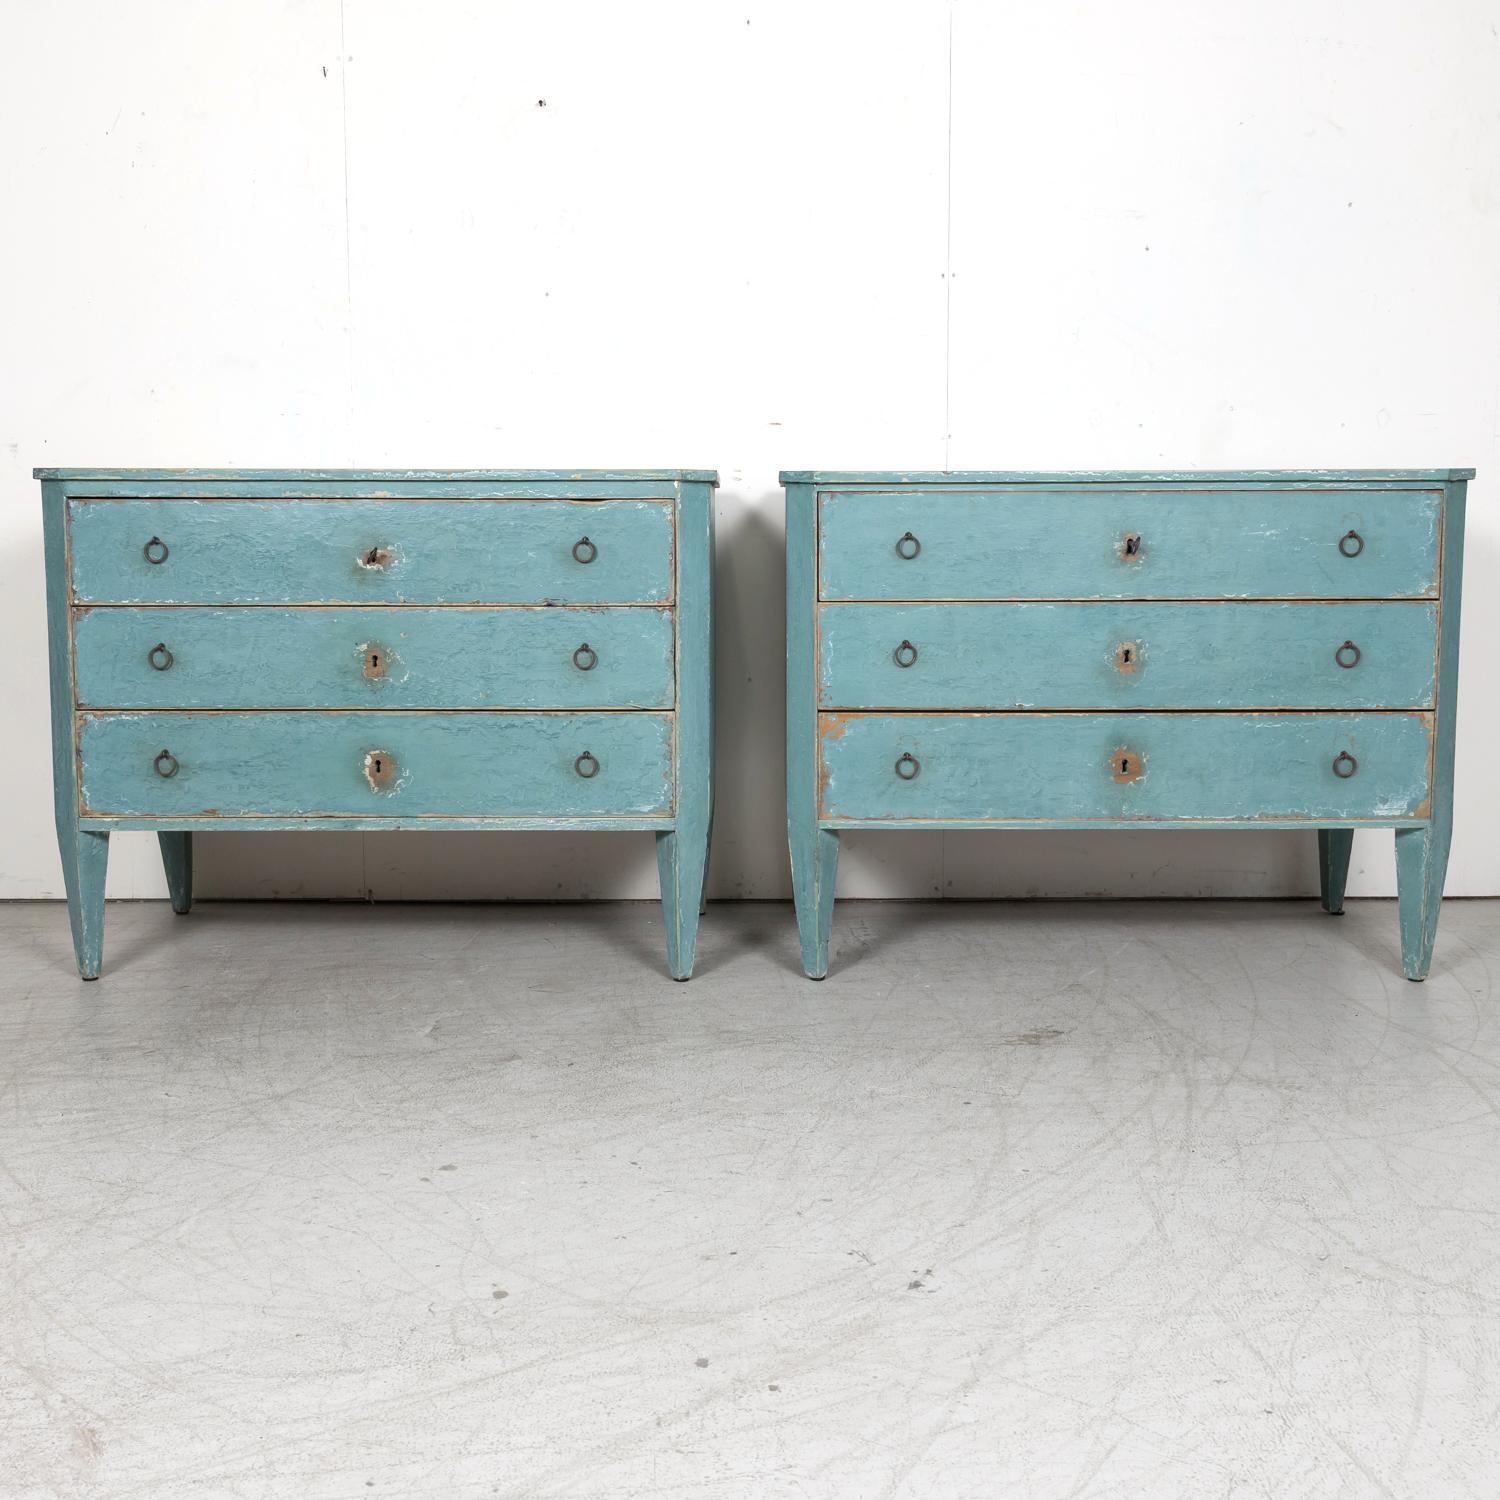 A pair of late 19th century French Louis XVI style aqua or teal painted three-drawer commodes from Provence, circa 1880s, having a rectangular plank top sitting above three full size drawers adorned with circular iron pulls. Raised on short tapered